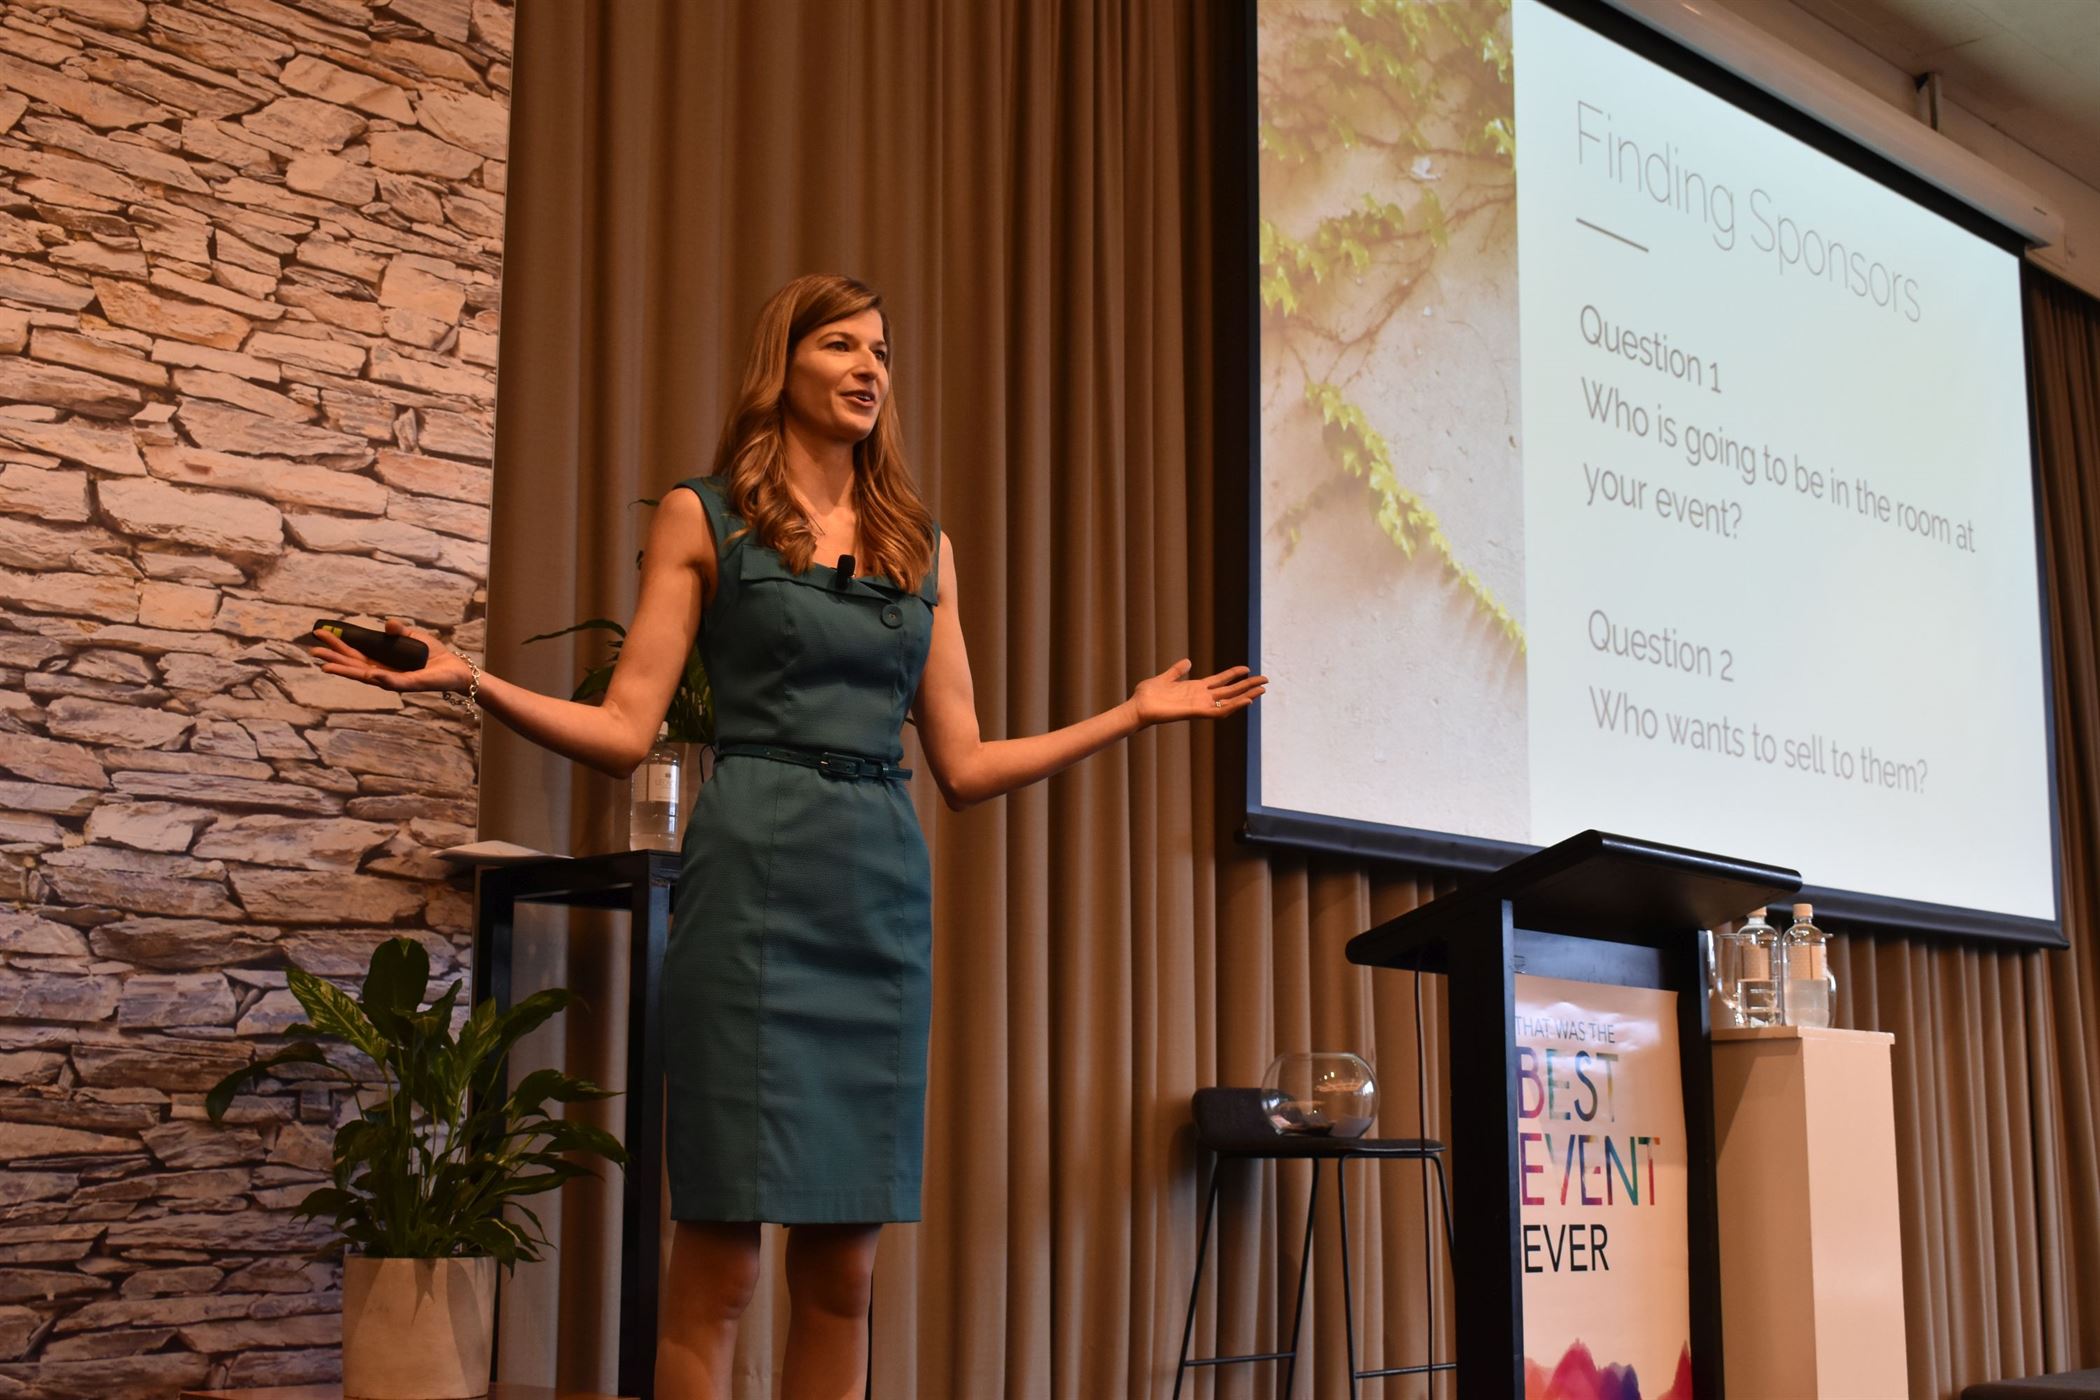 A confident woman presenting at a conference in Melbourne, captivating the audience with her knowledge and expertise.